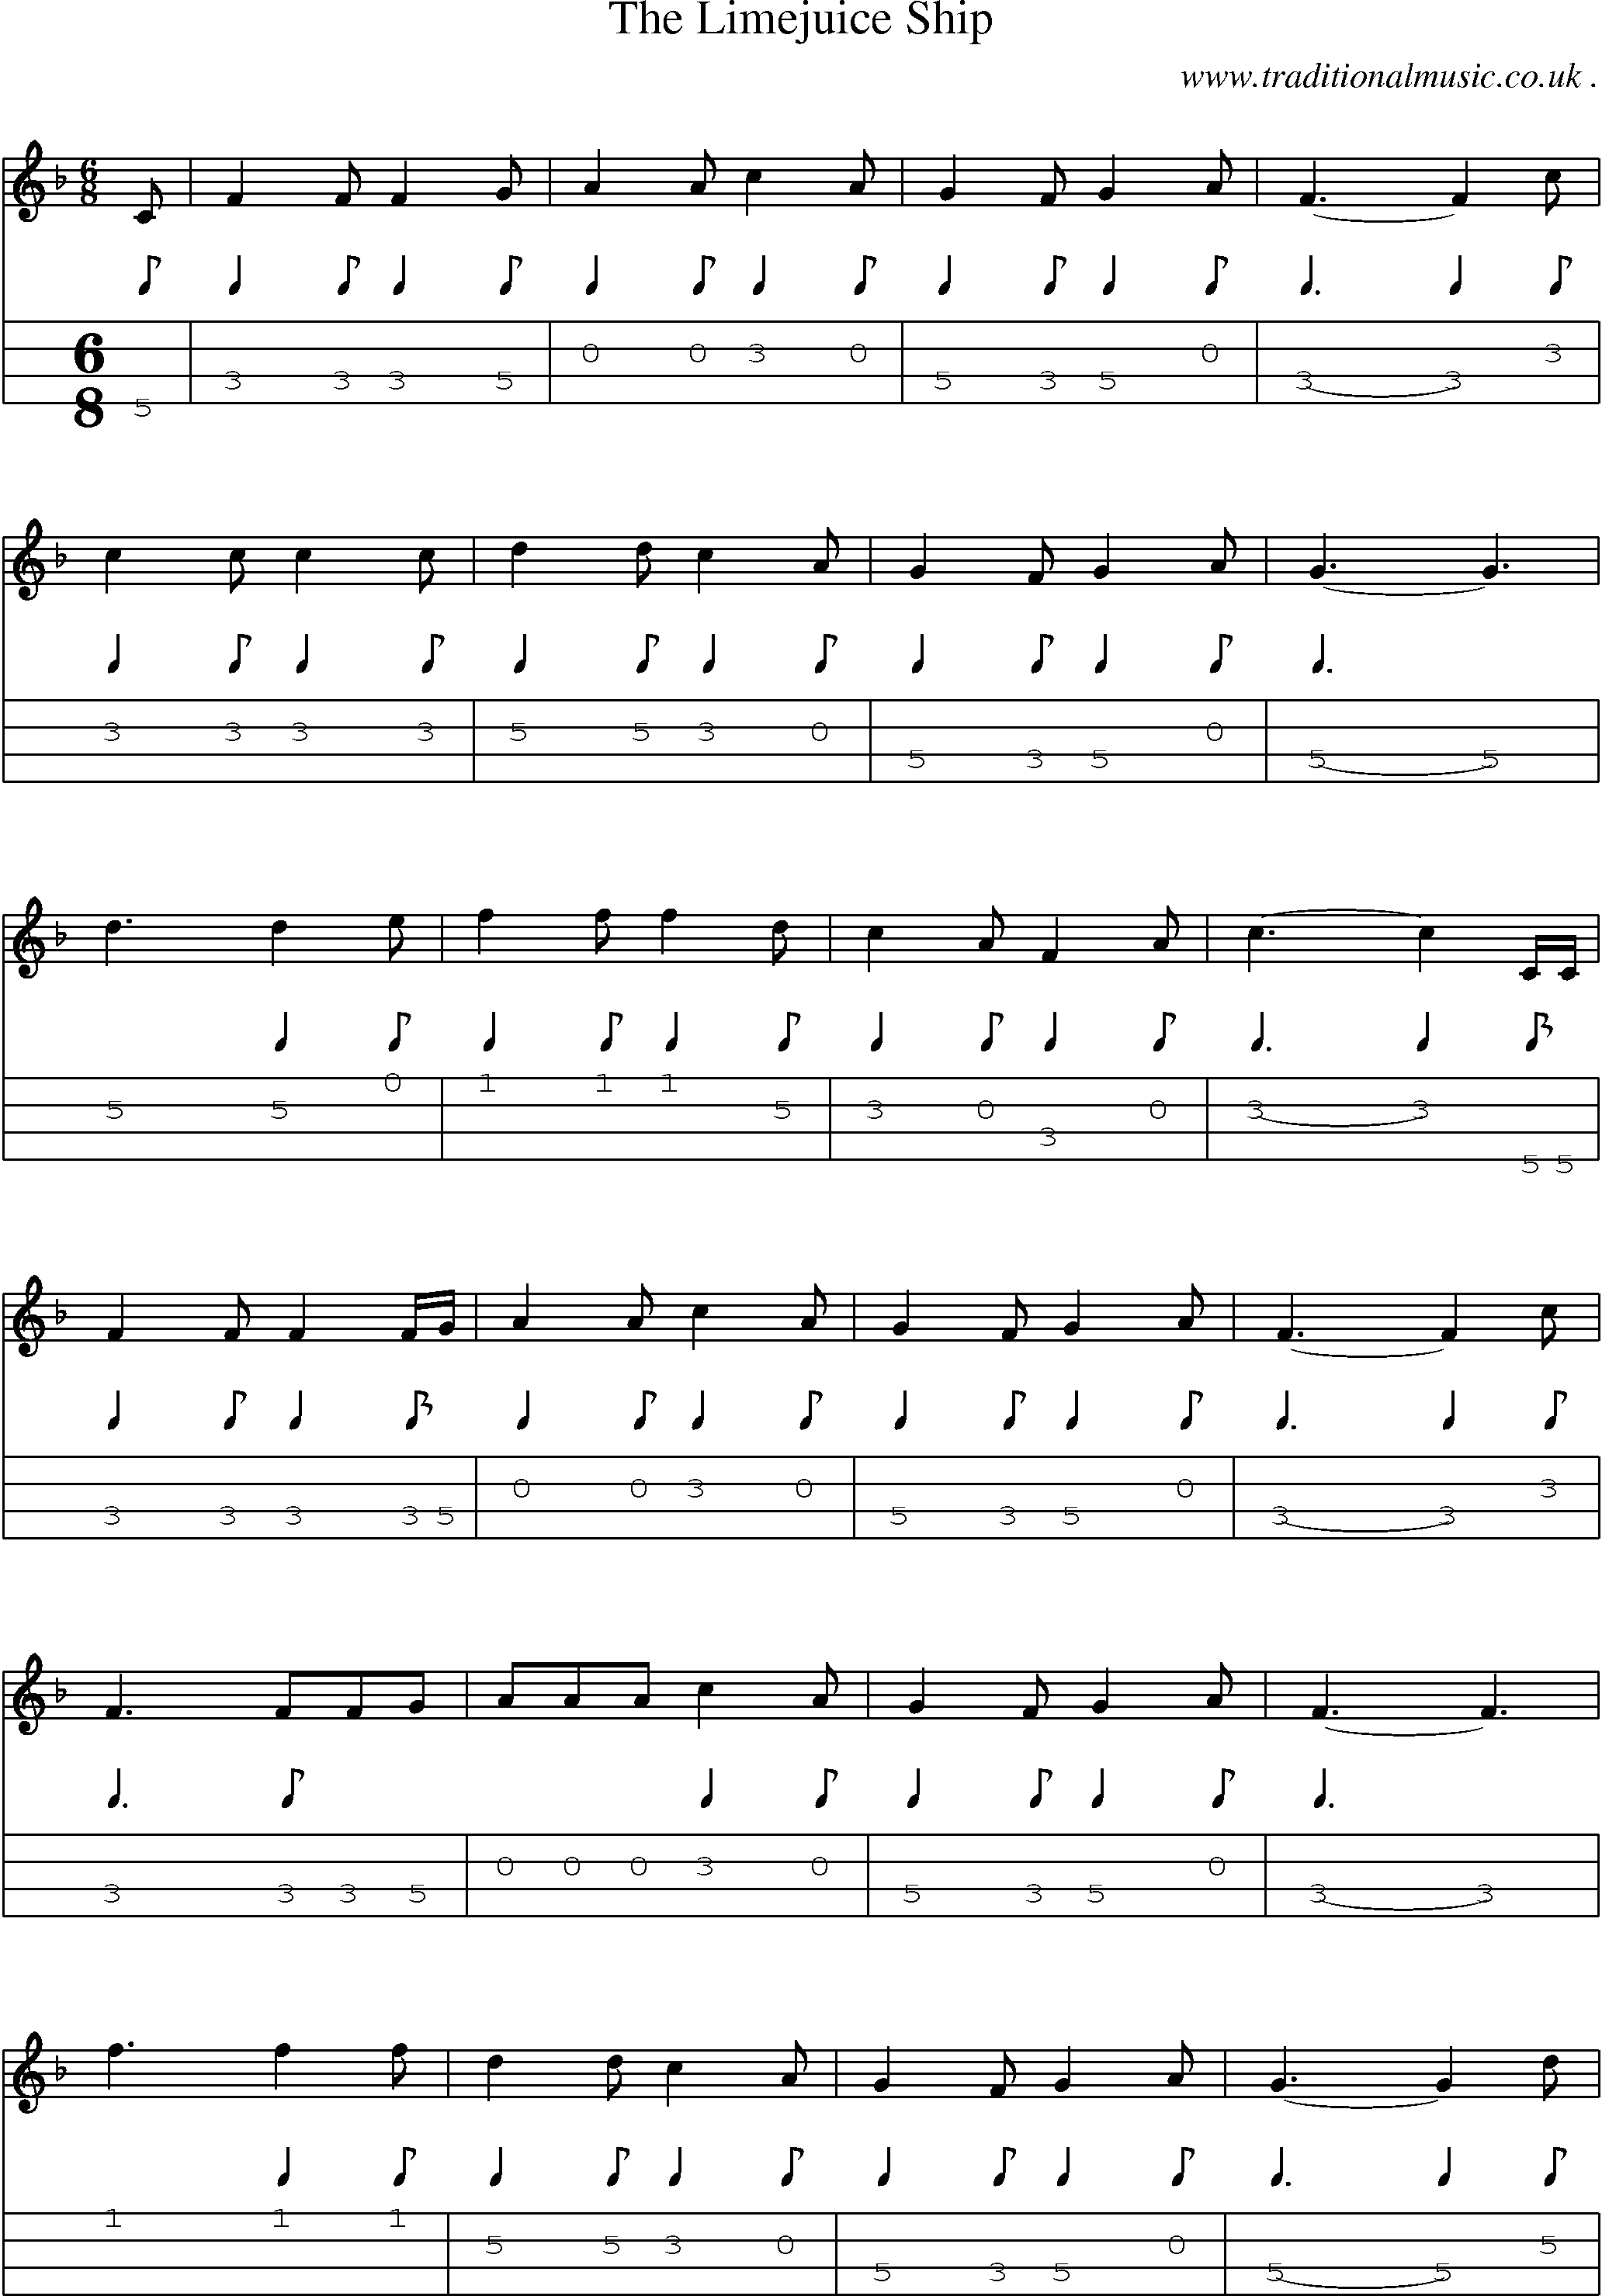 Sheet-Music and Mandolin Tabs for The Limejuice Ship